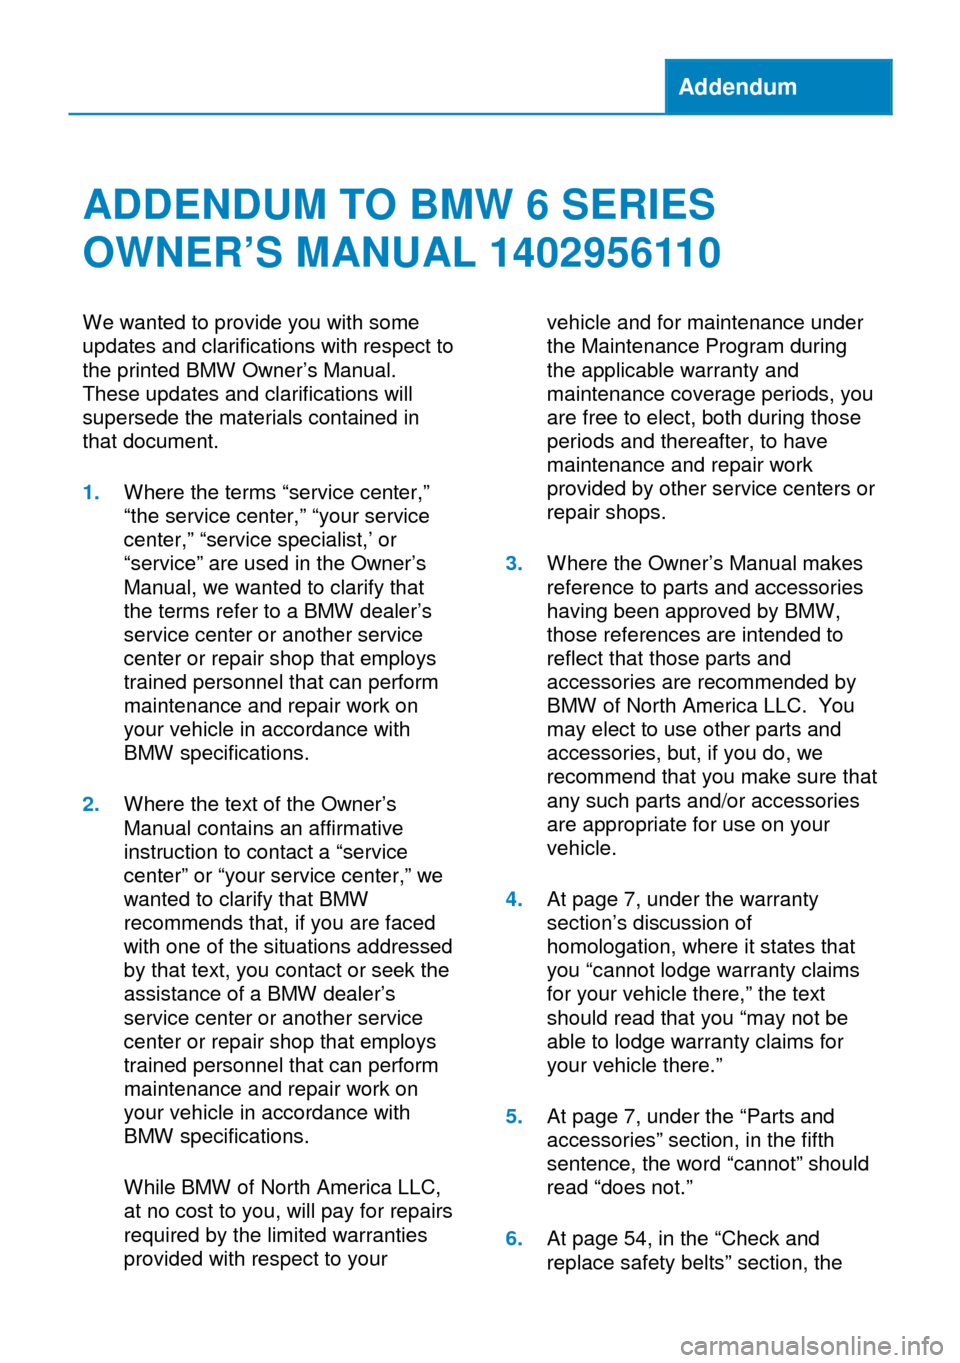 BMW 6 SERIES GRAN COUPE 2014 F06 Owners Manual Addendum
ADDENDUM TO BMW 6 SERIES
OWNER’S MANUAL 1402956110
We wanted to provide you with some
updates and clarifications with respect to
the printed BMW Owner’s Manual.
These updates and clarific